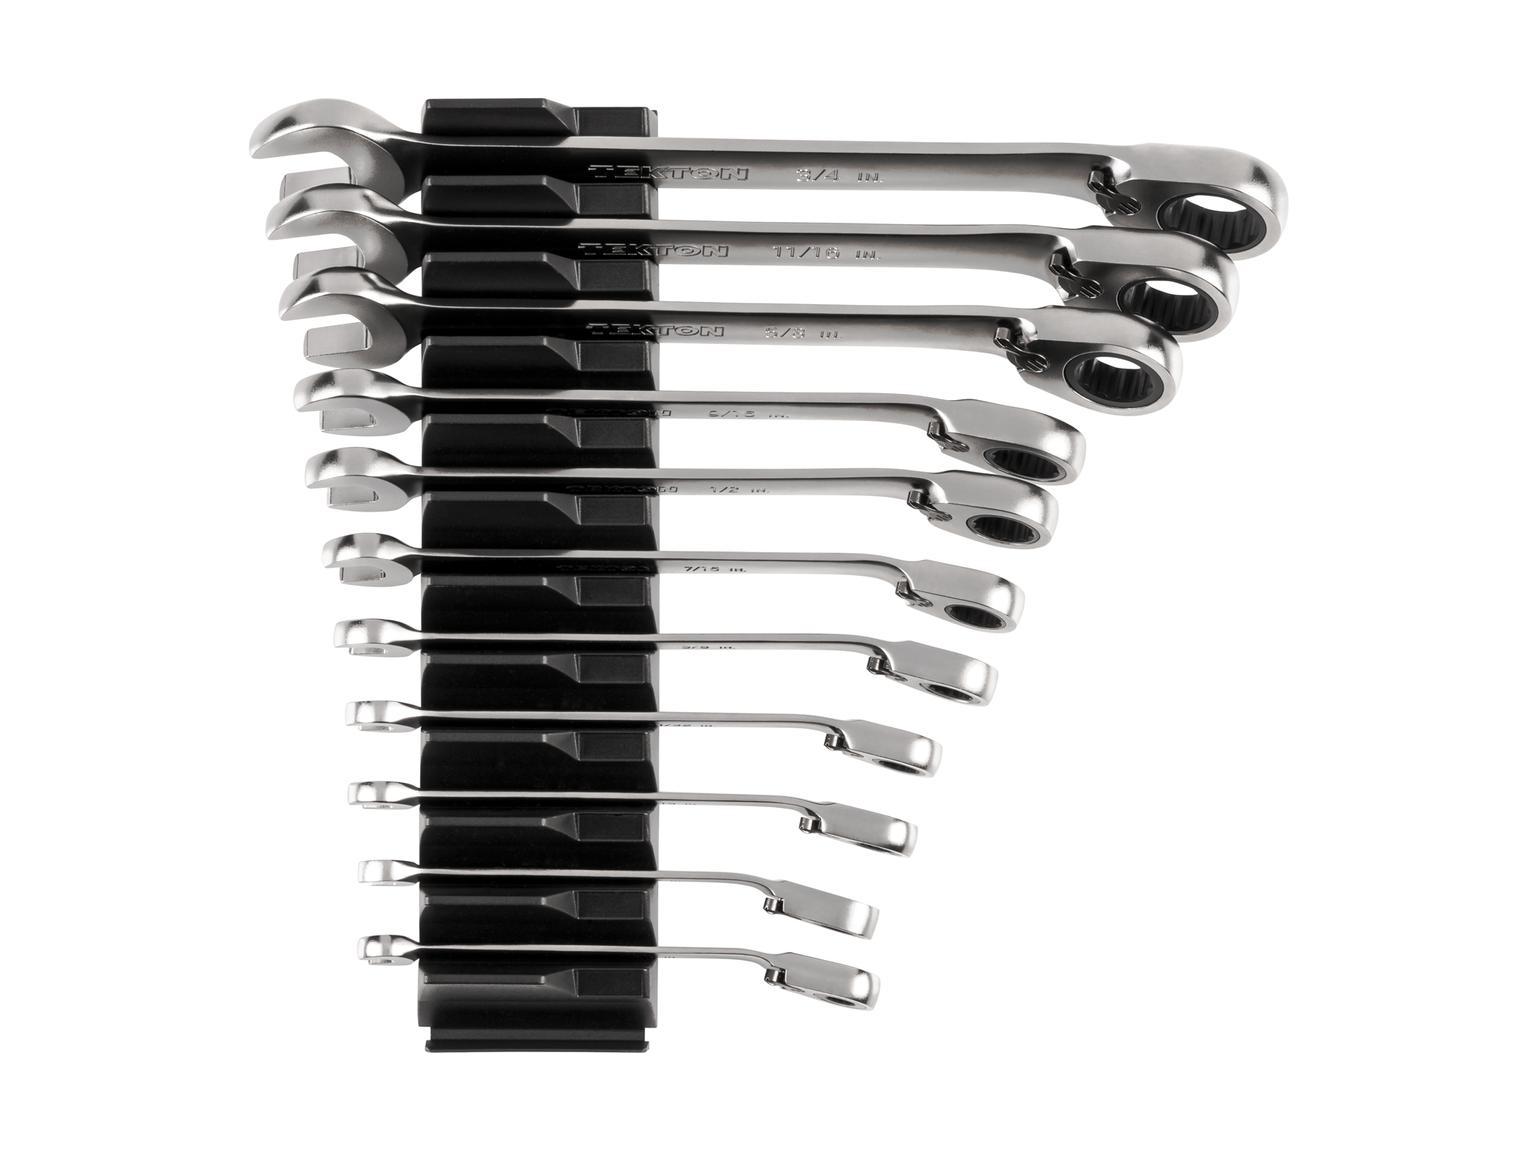 Reversible 12-Point Ratcheting Combination Wrench Set, 11-Piece (Modular Slotted Organizer)